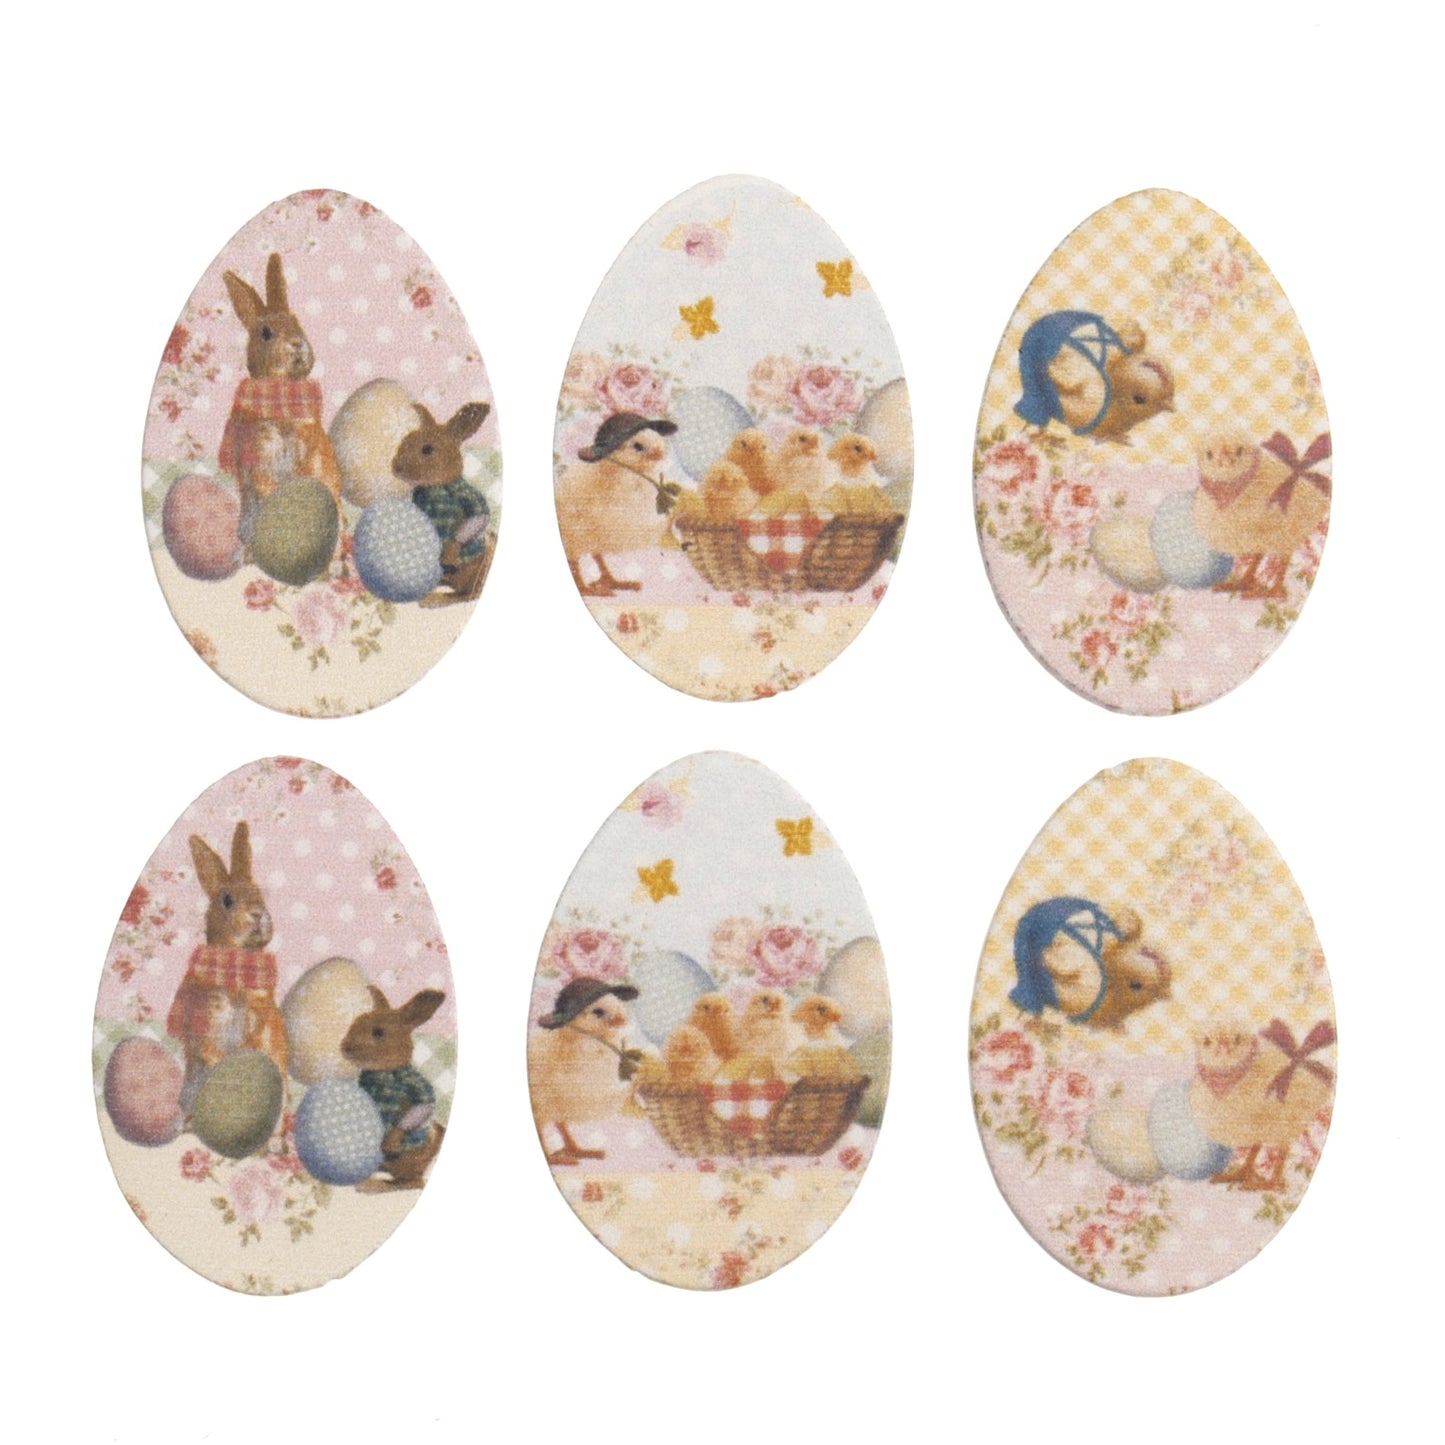 CRAFT EMBELLISHMENTS- EASTER EGGS - Pack of 6